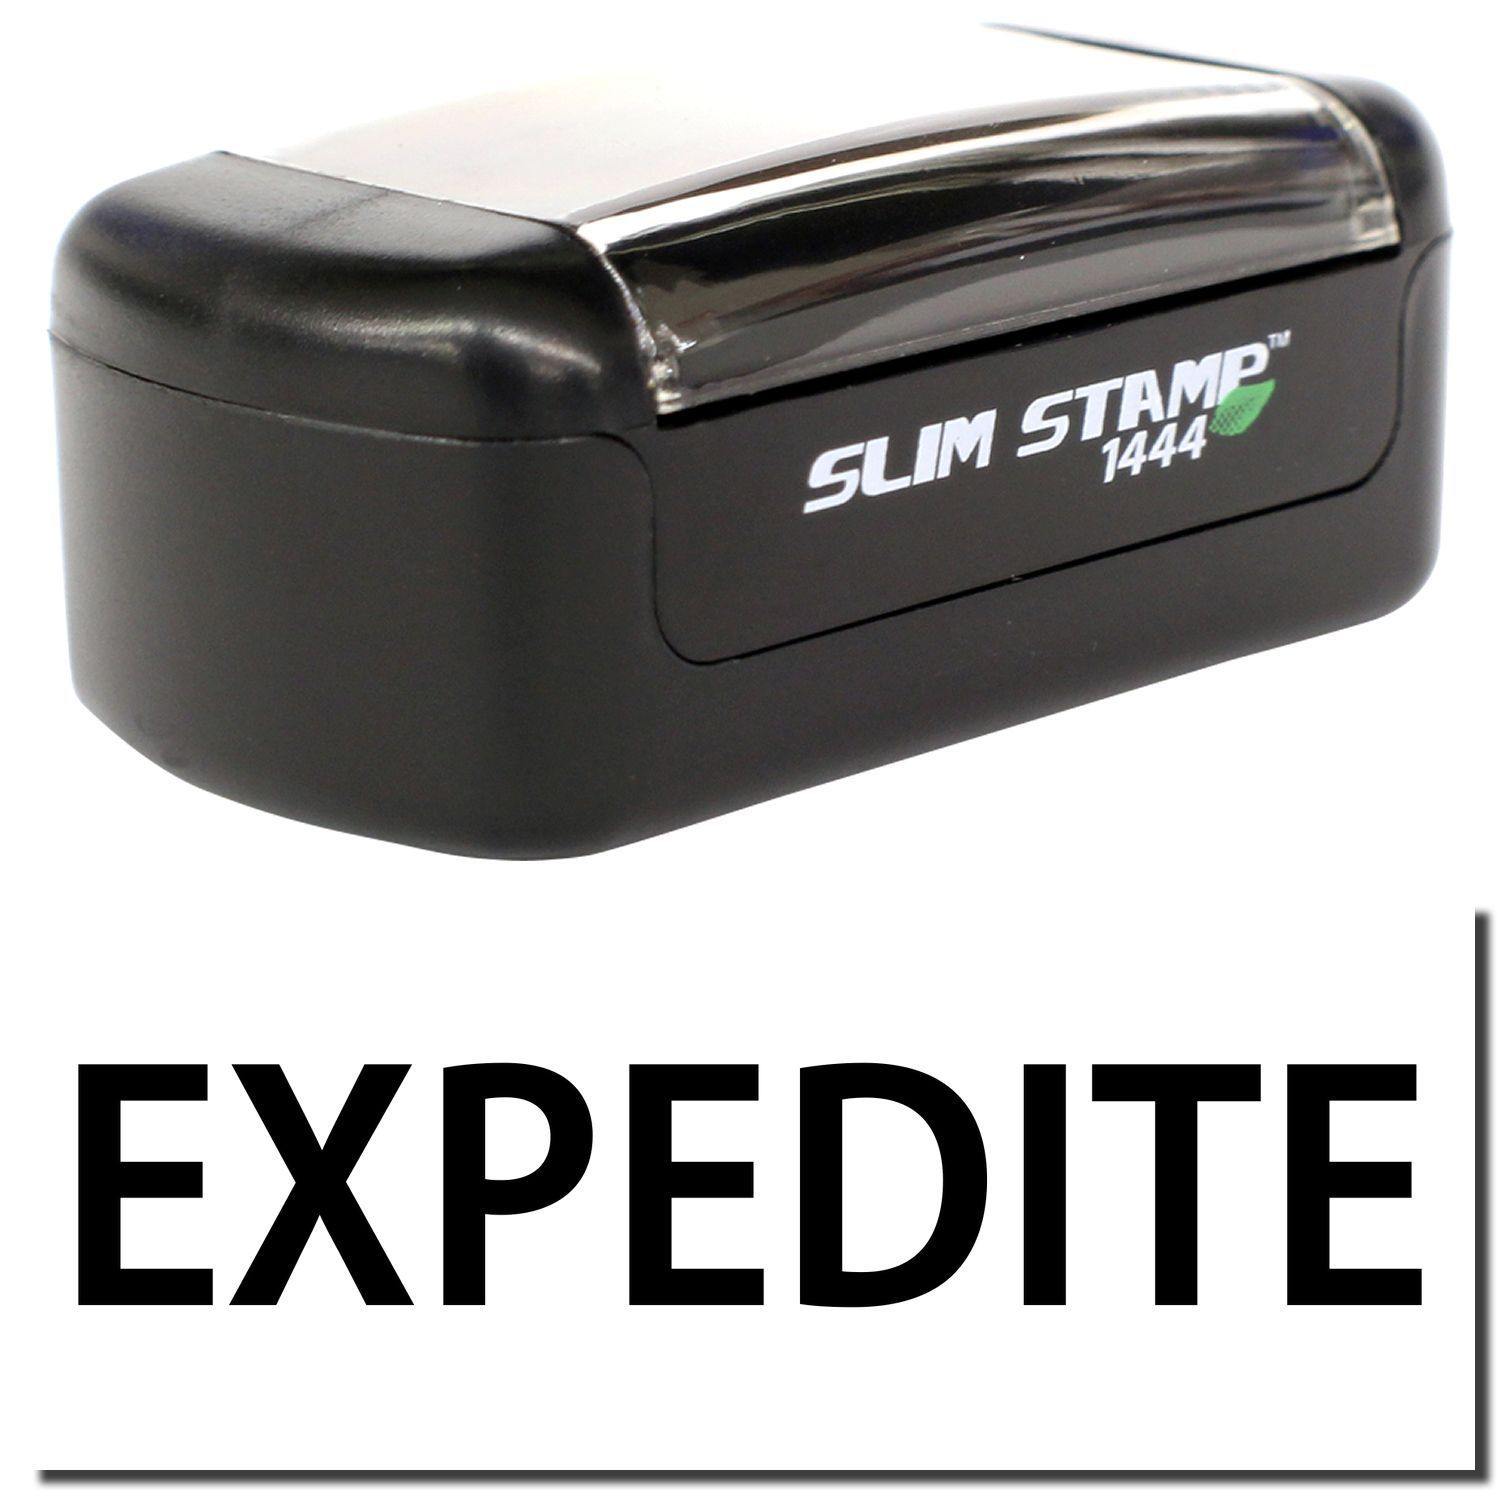 A stock office pre-inked stamp with a stamped image showing how the text "EXPEDITE" is displayed after stamping.